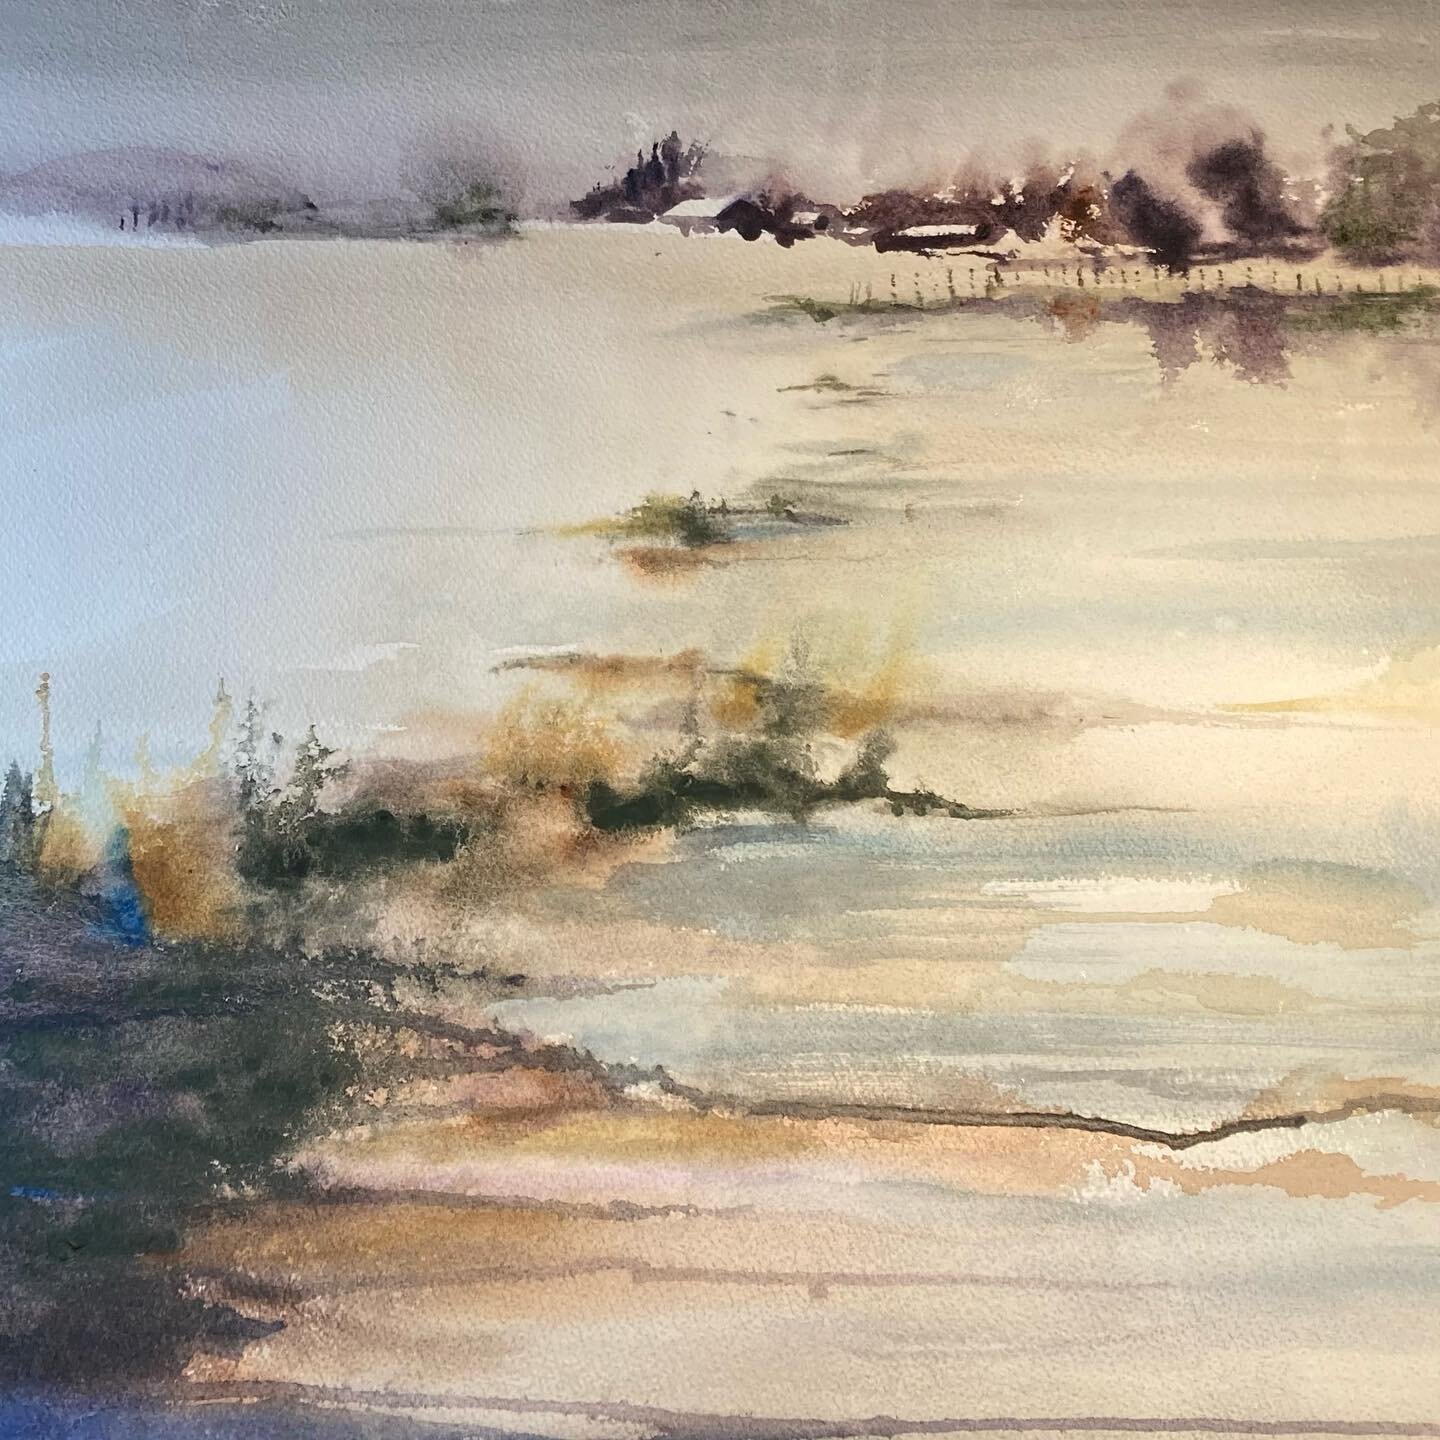 Winter sky, winter day -  waiting for snow. #watercolour  #watercolorpainting #portwsshingtonny #waterscape#winterscape  #greysky #abstractpainting  #abstractlandscape #abstractwatercolor #waitingforsnow